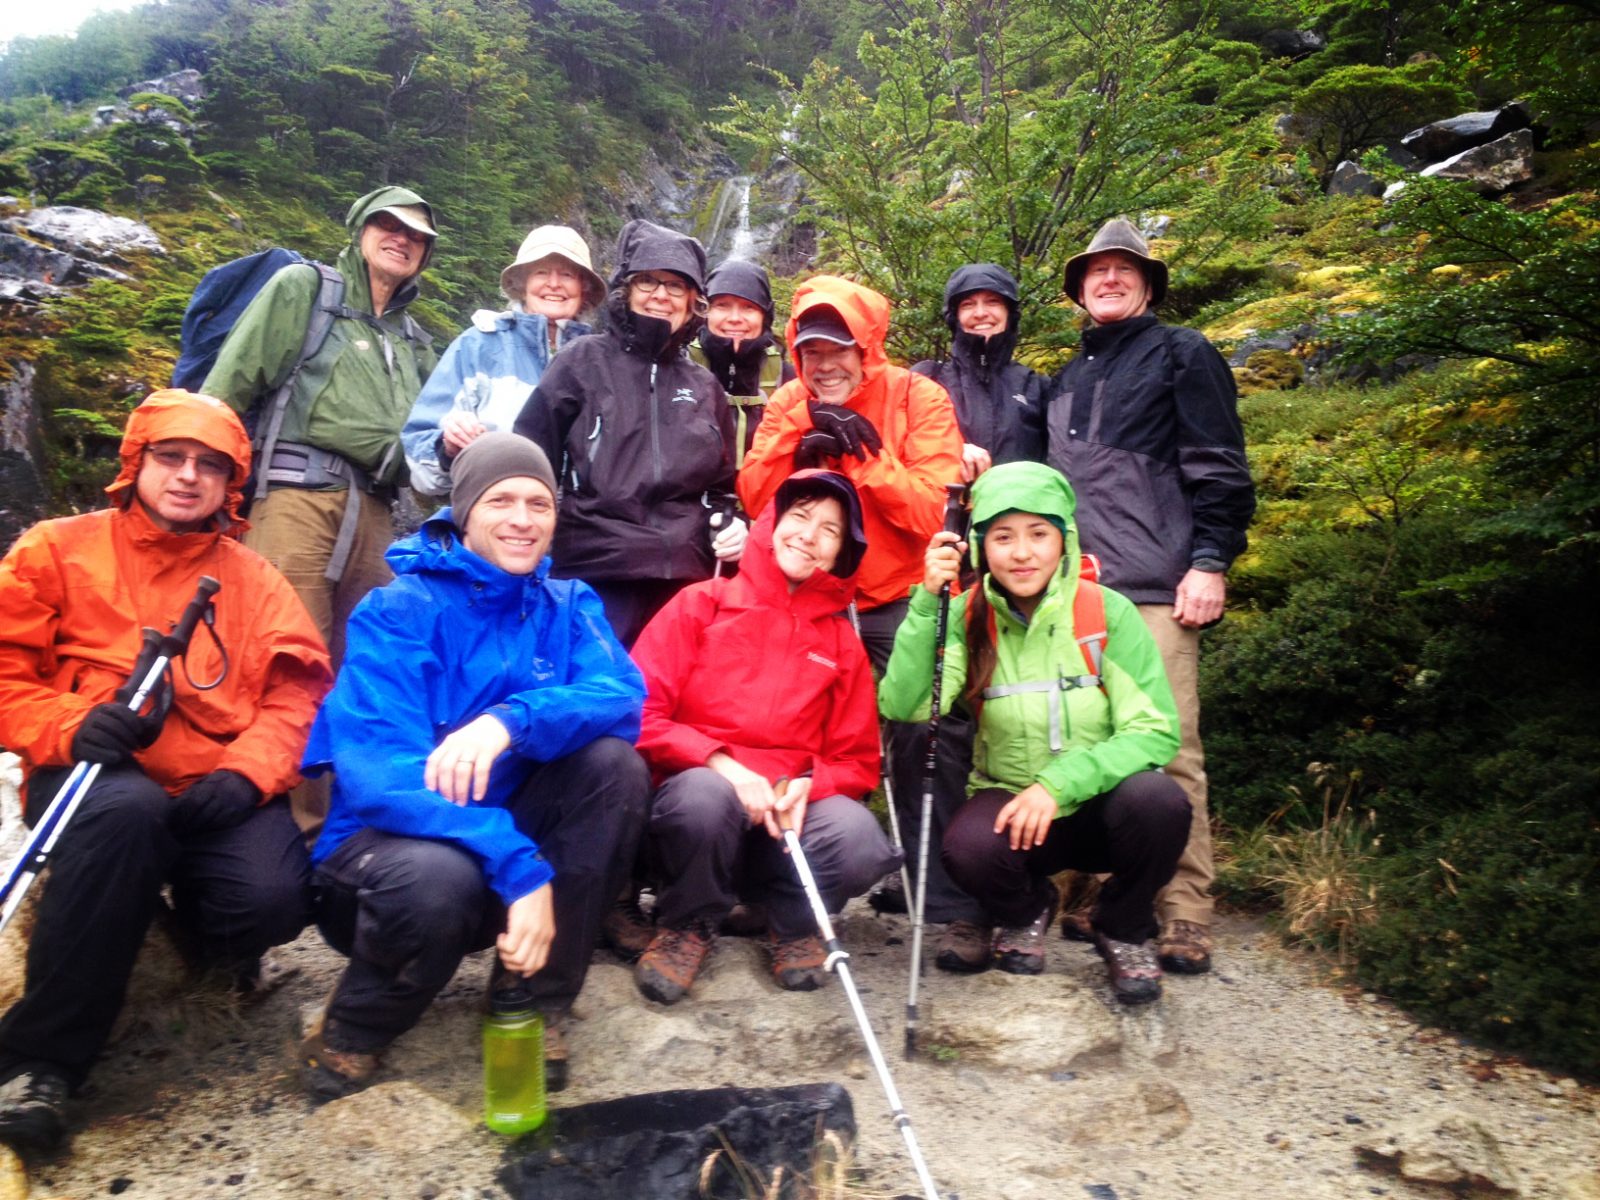 Hikers grouped together for a photo in the rainy forest